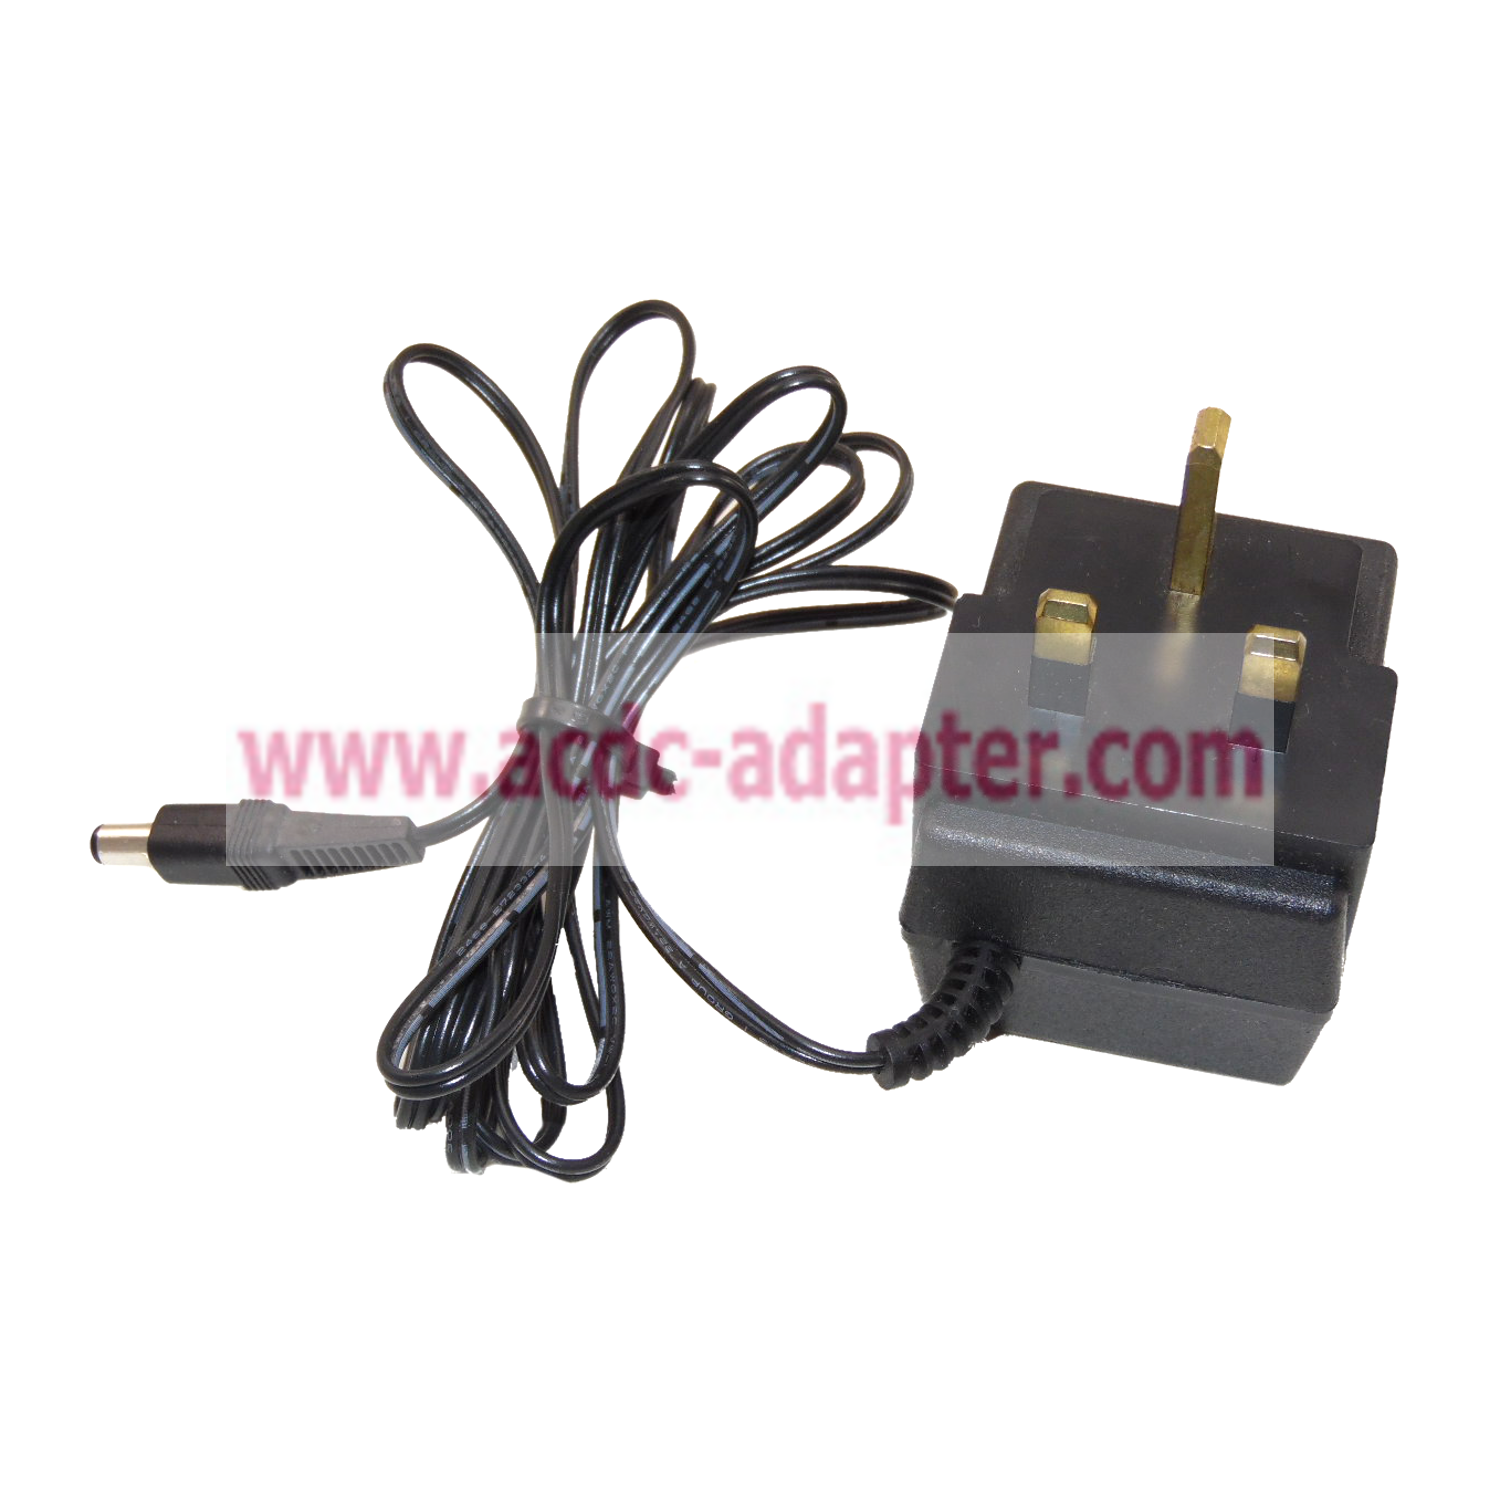 NEW AD-0750D 7.5VDC 500mA Power AC Adapter